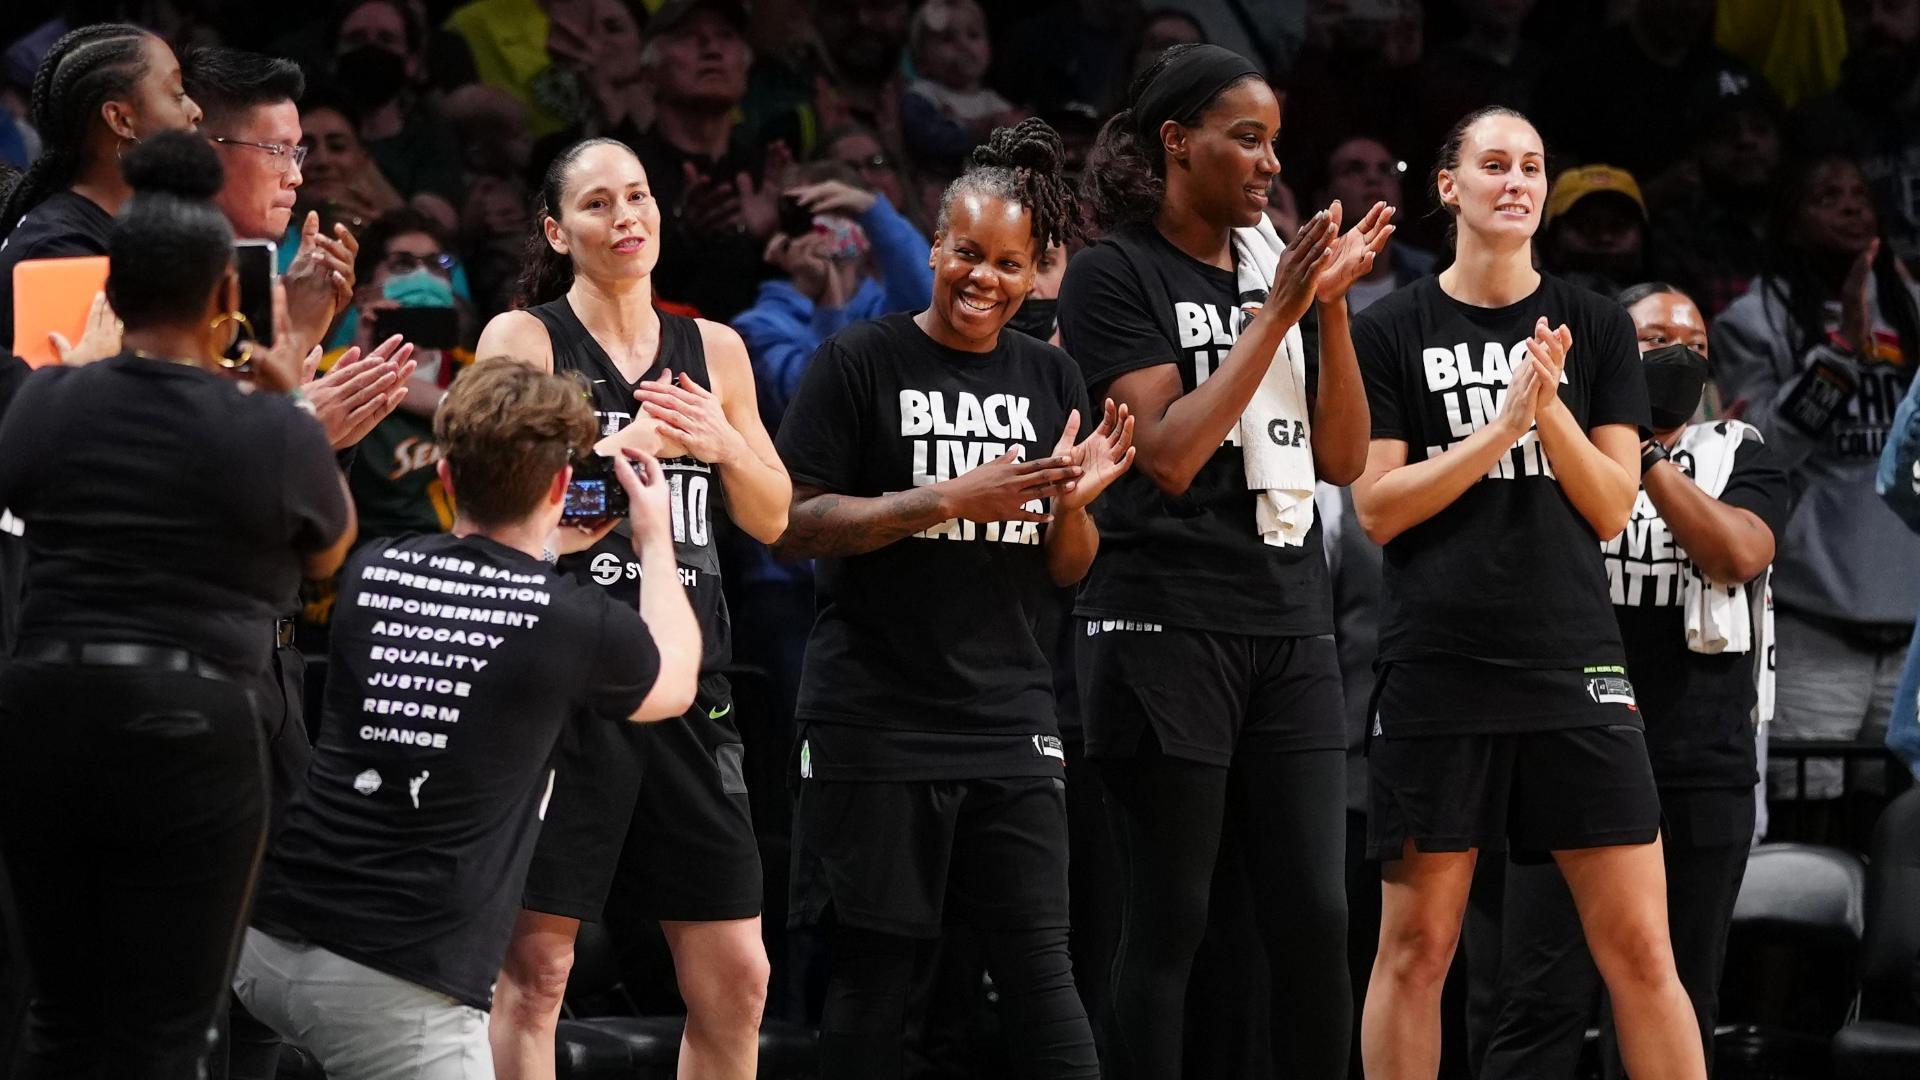 Sue Bird hits dagger 3, then gets ovation in likely last game in N.Y.